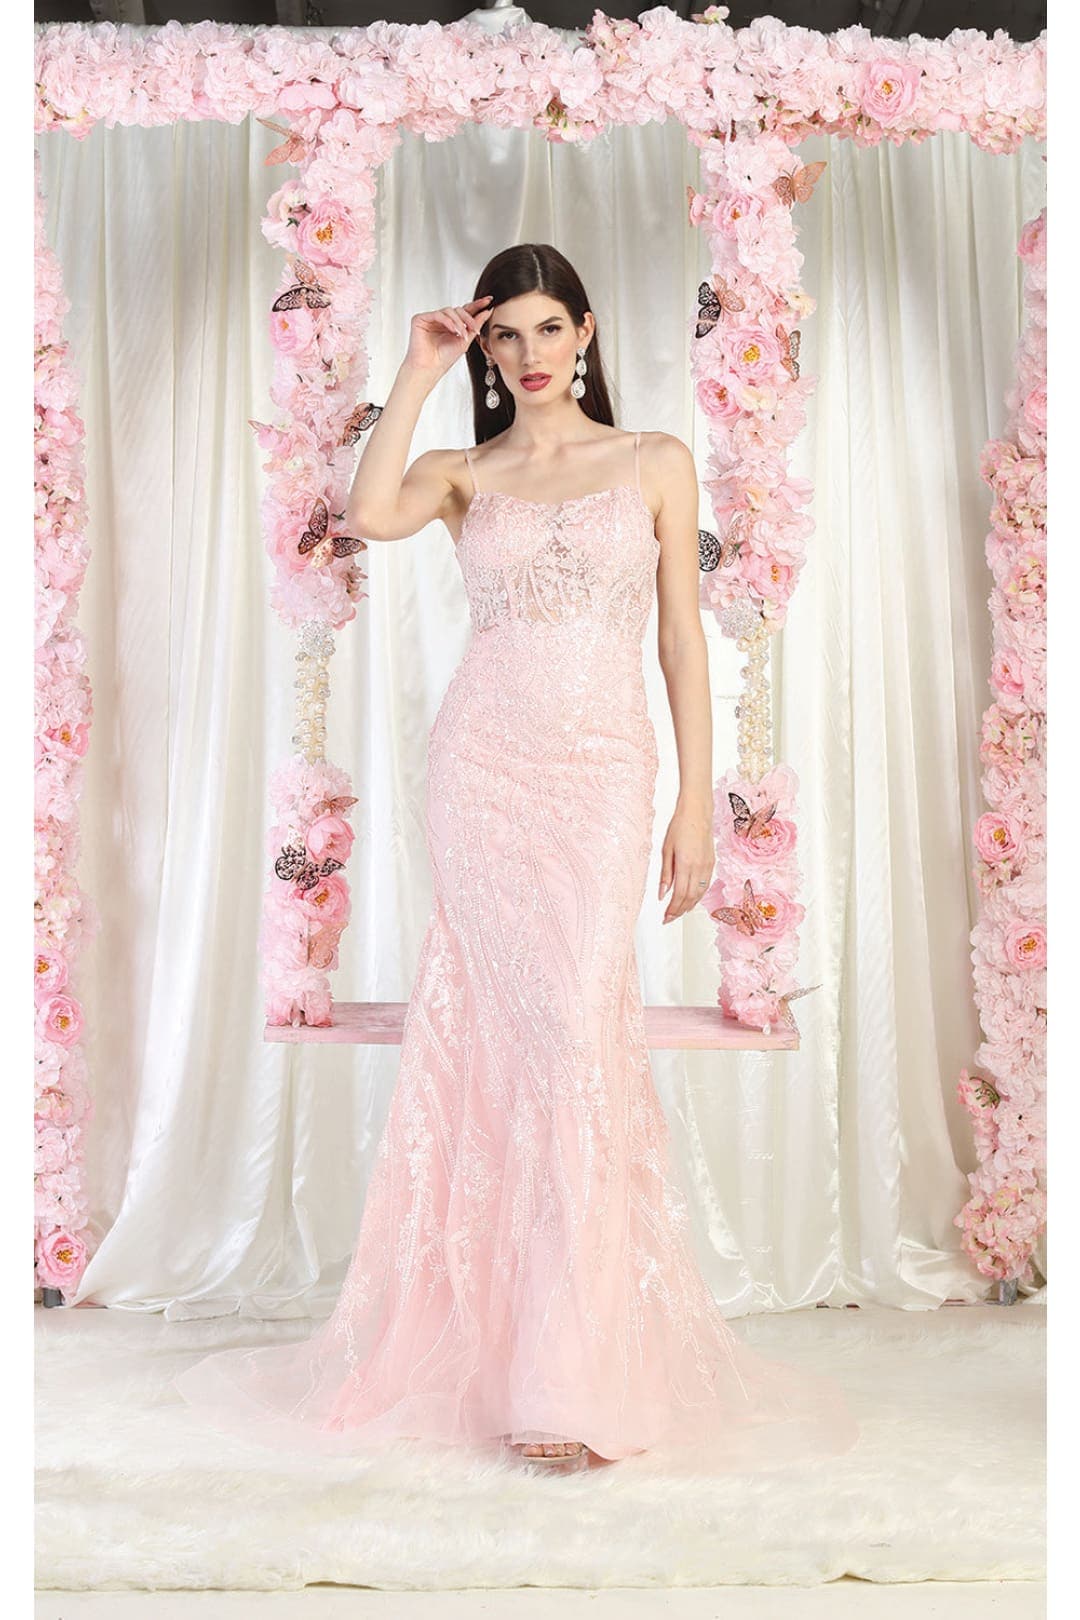 Royal Queen RQ7974 Embellished Evening Gown - BLUSH / 4 - Dress